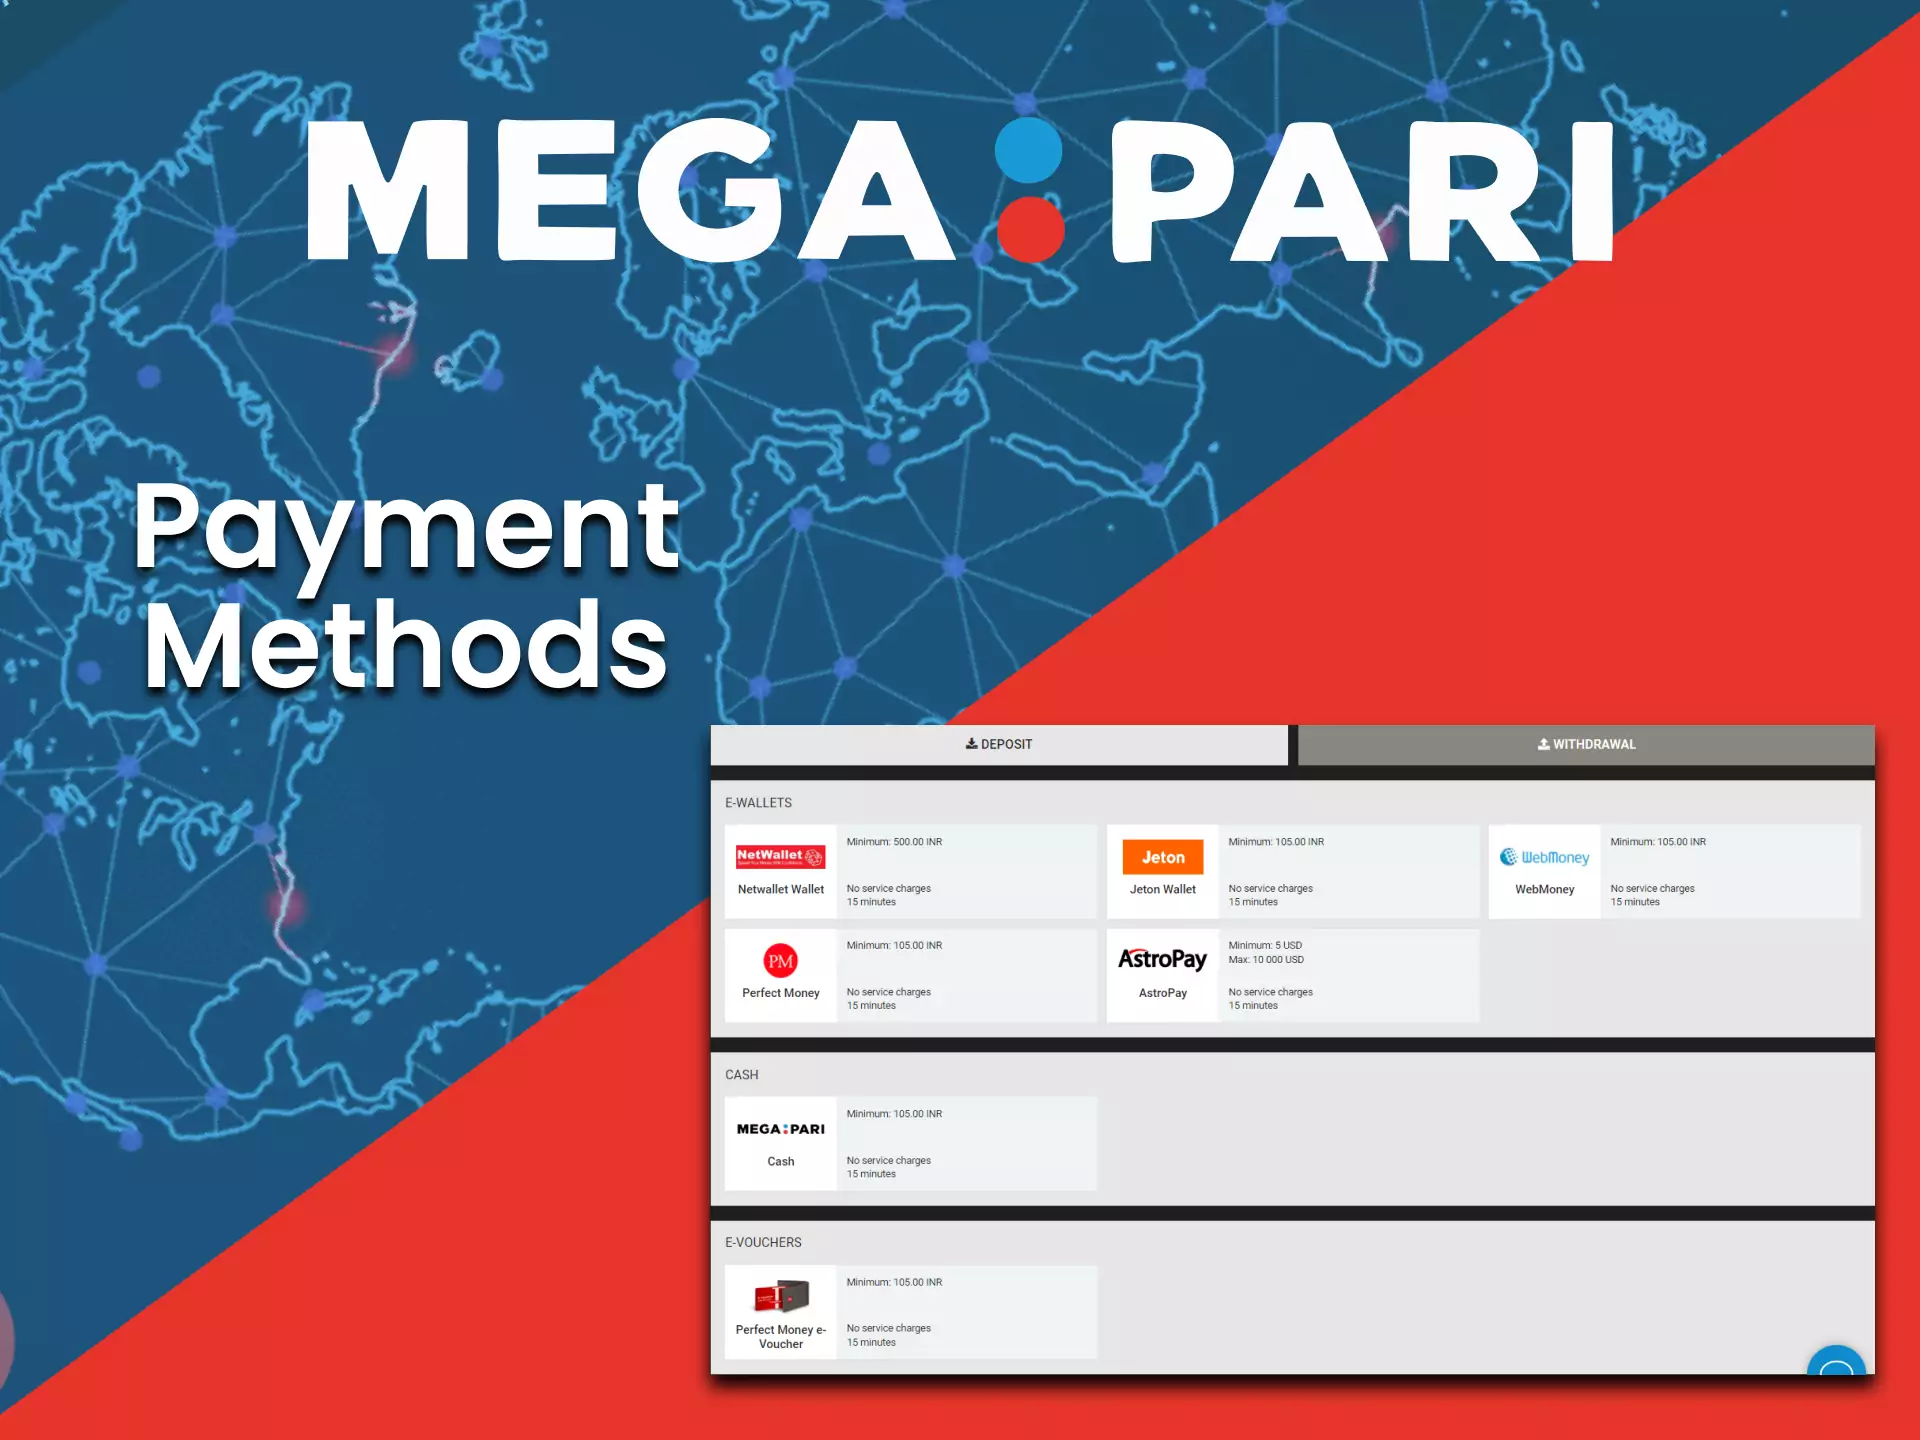 The Megapari affiliate program uses the most common payment methods in India.